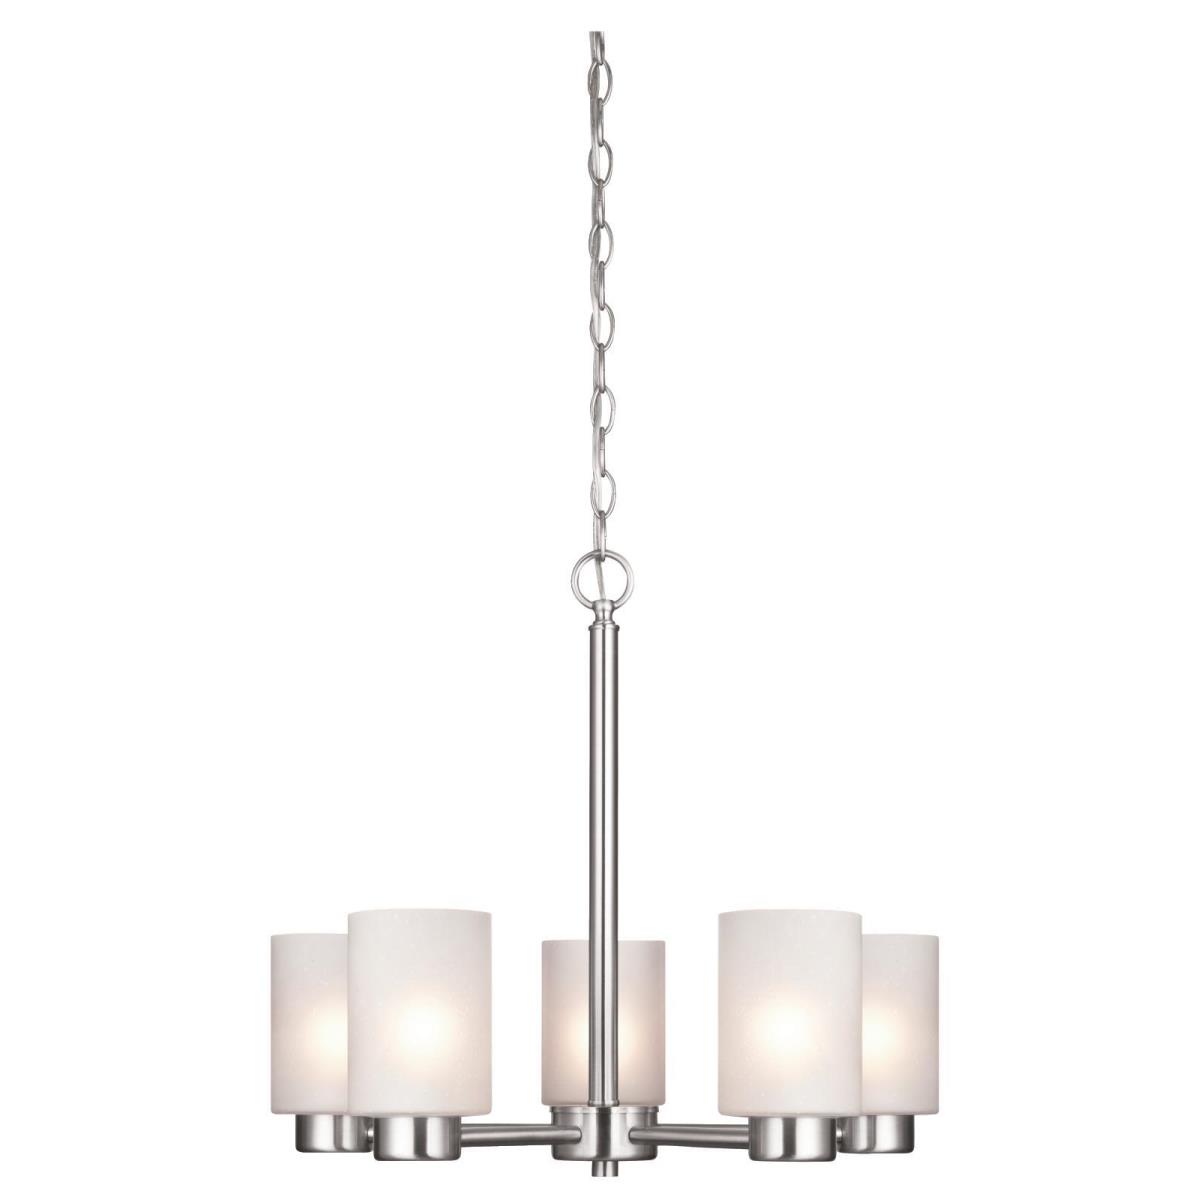 5 Light Chandelier Brushed Nickel Finish with Frosted Seeded Glass